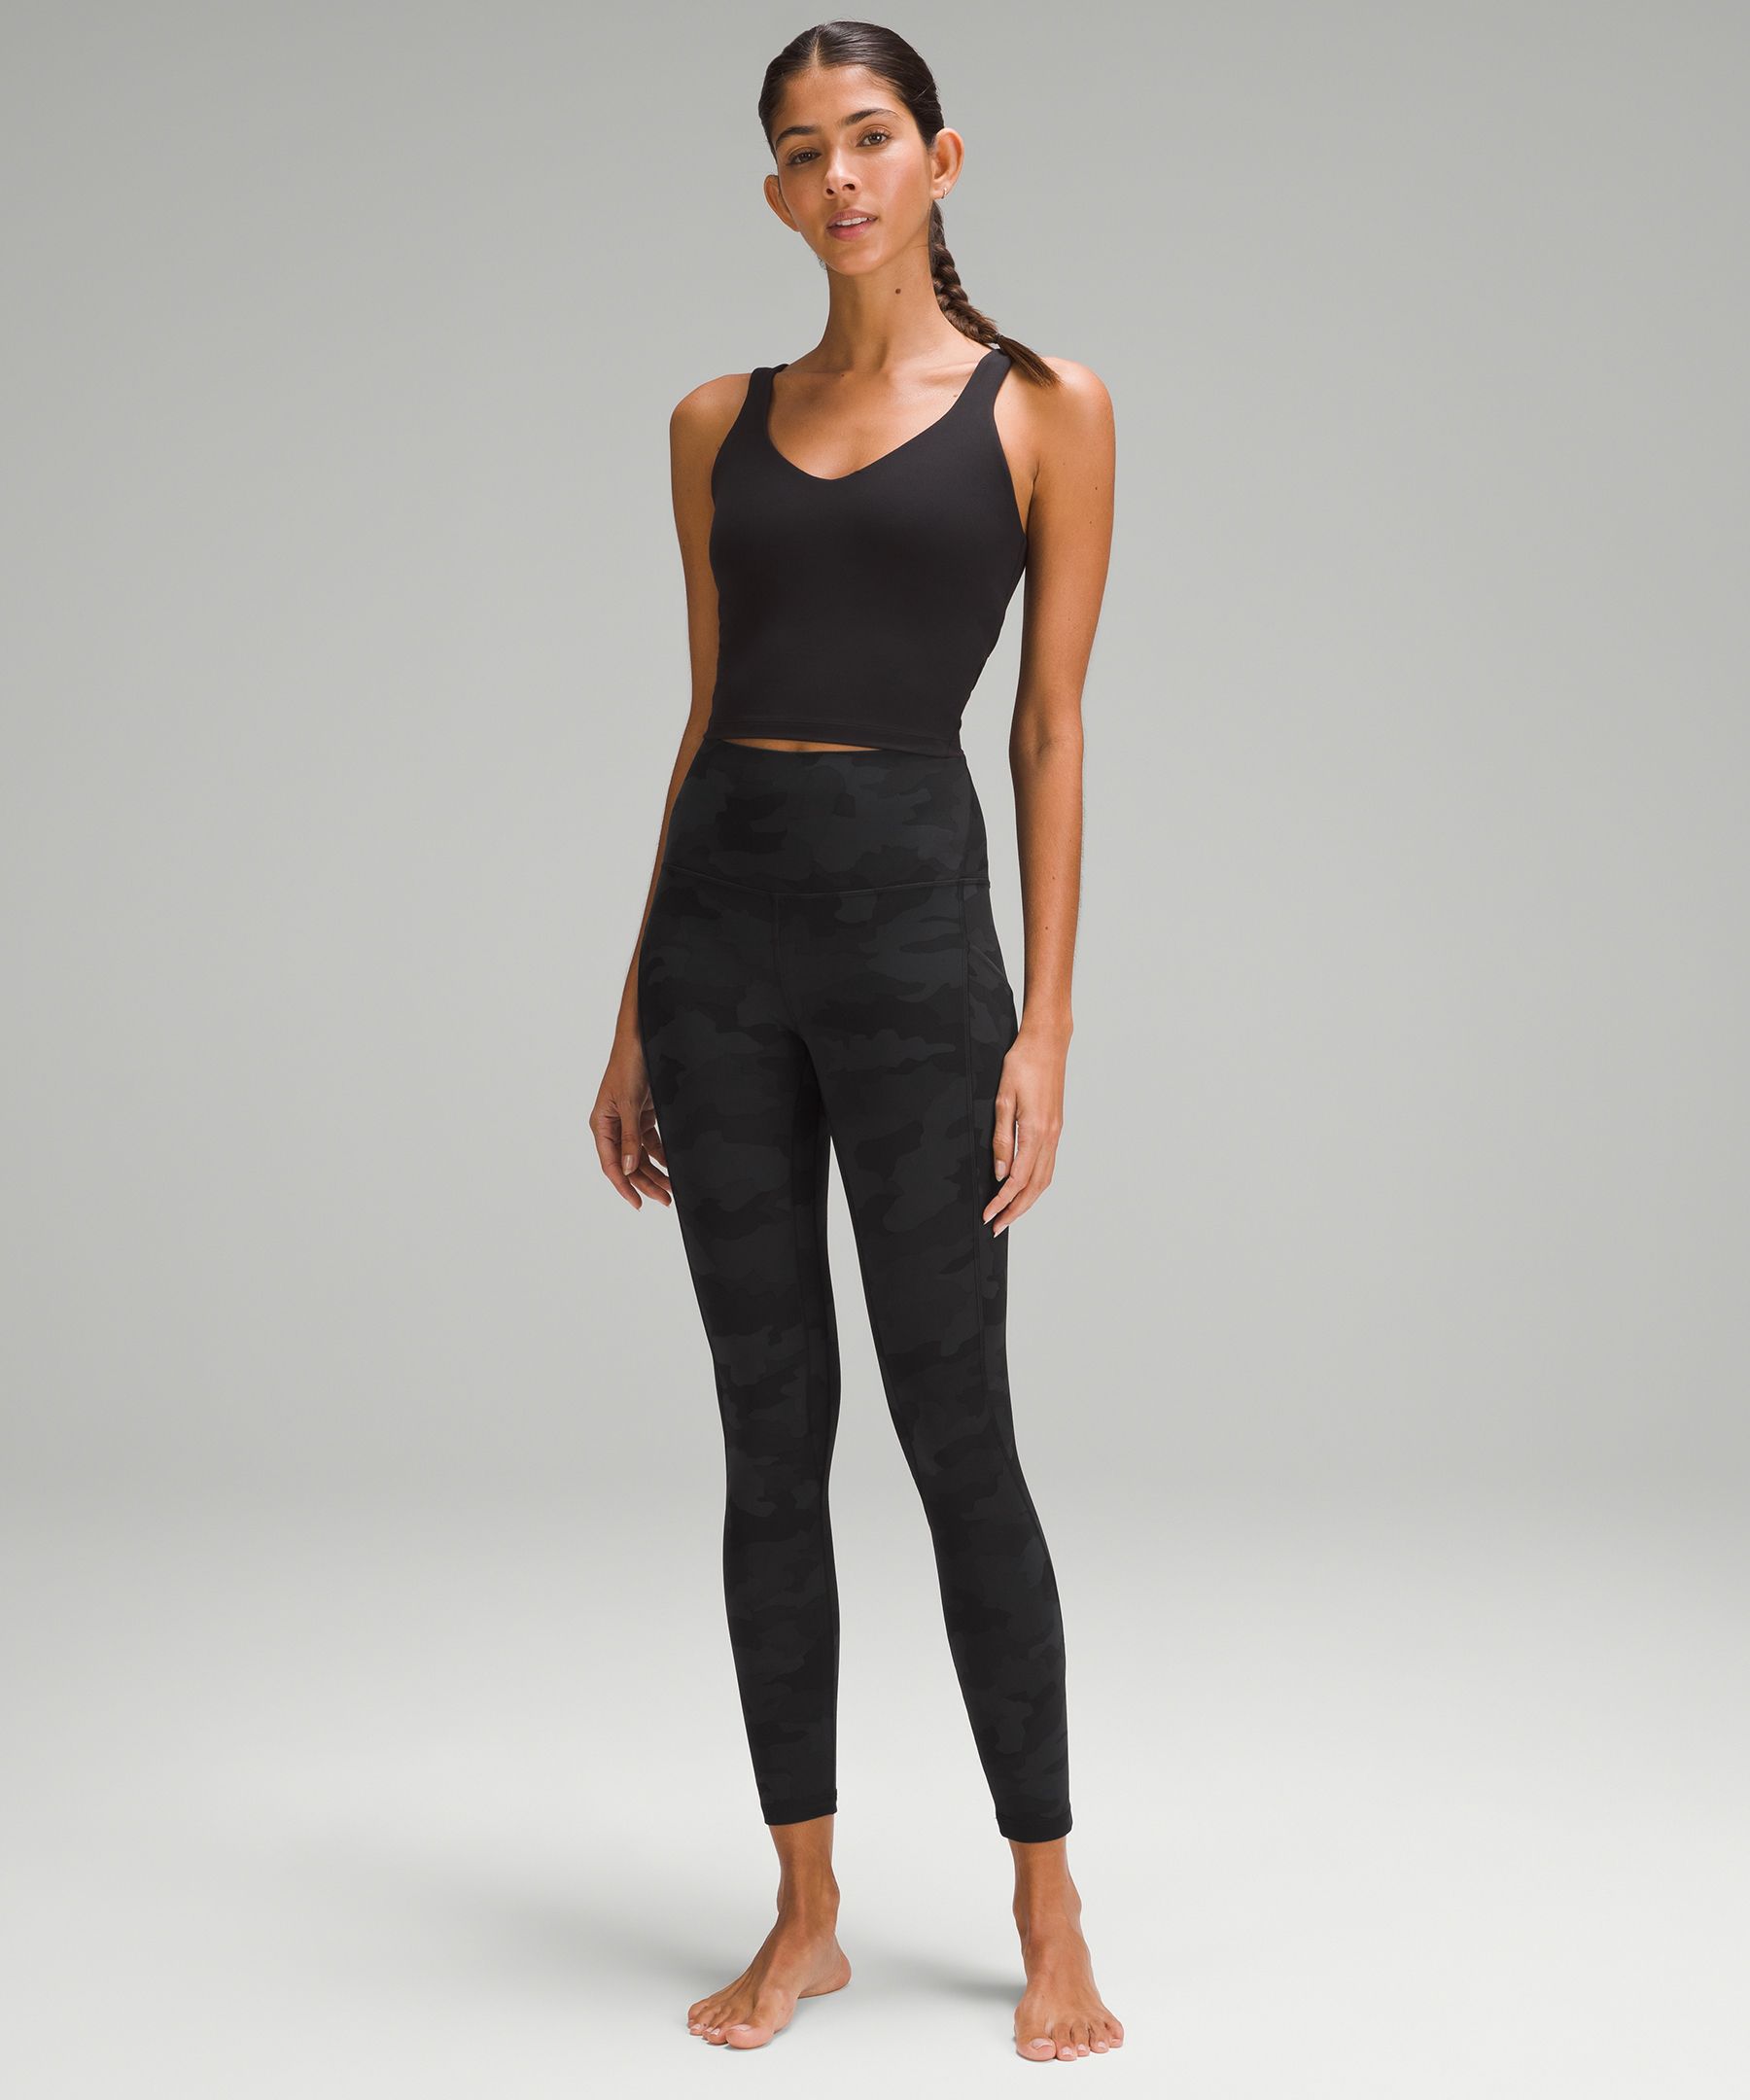 lululemon Align™ High-Rise Pant with Pockets 25, Women's Pants